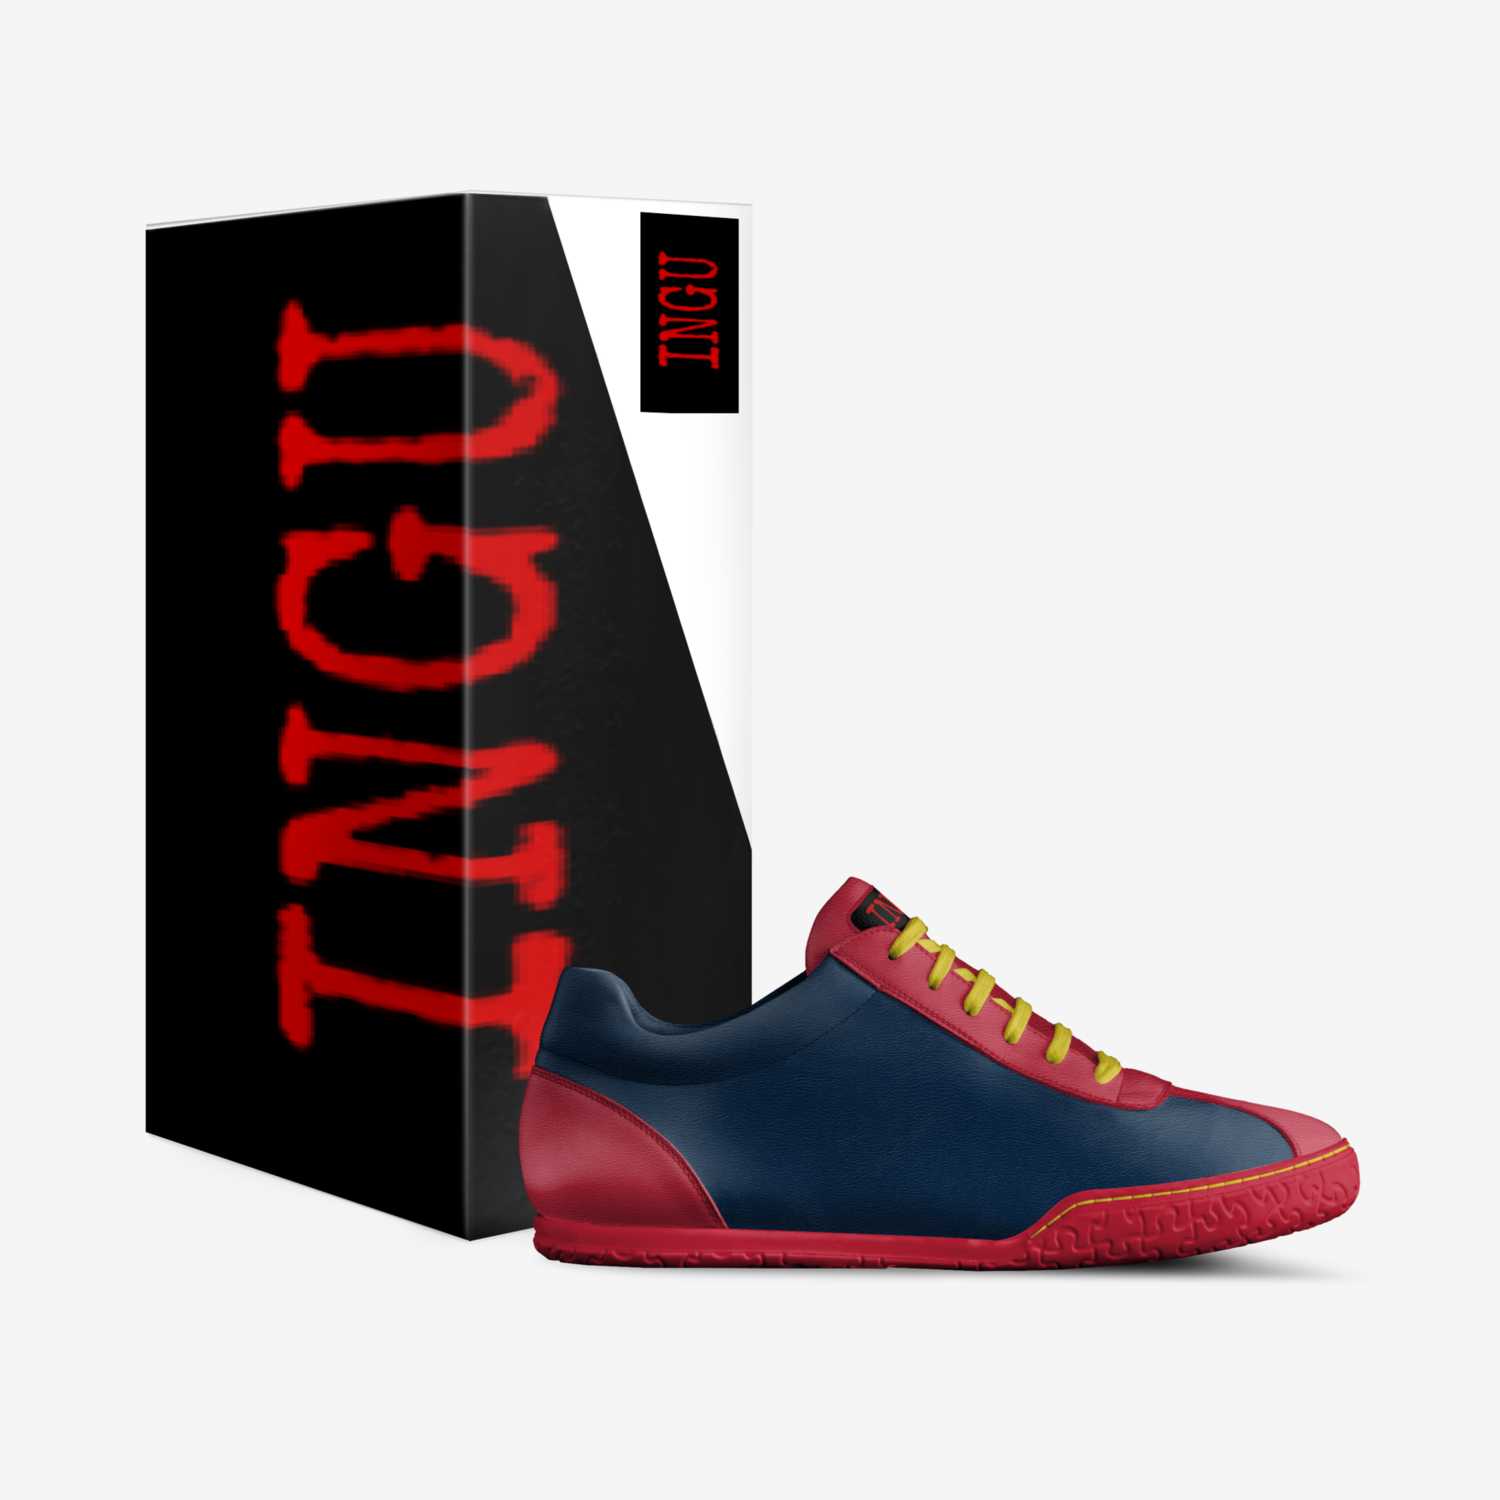 INGU custom made in Italy shoes by Tyrese Payeton | Box view